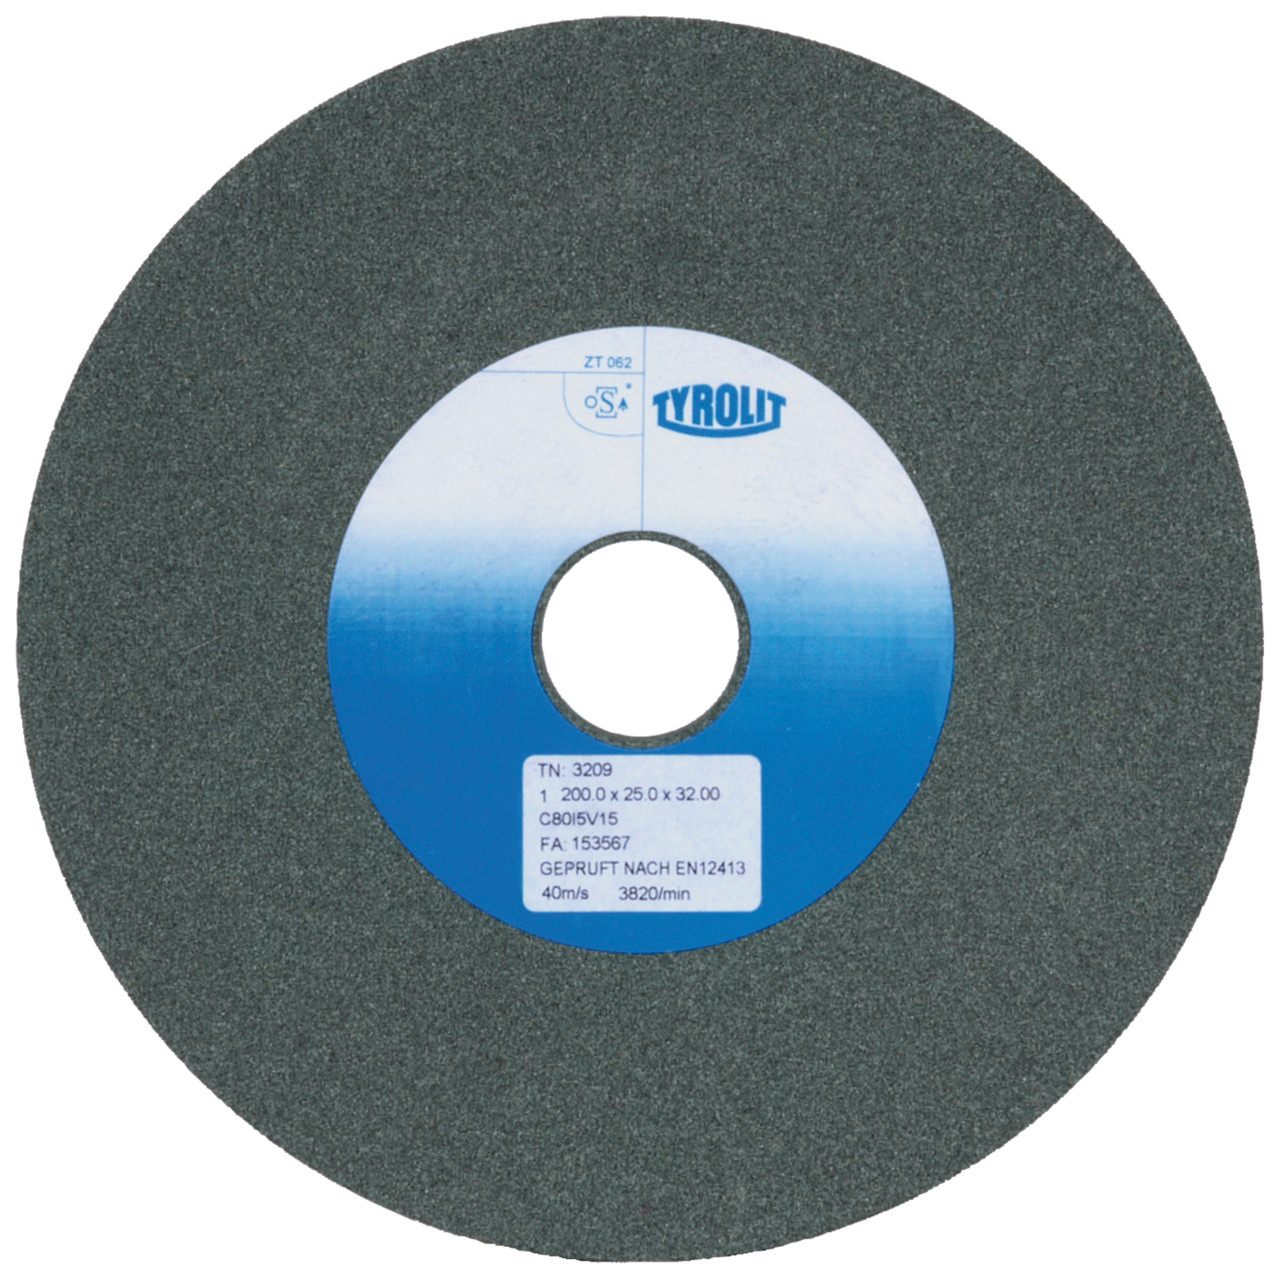 Tyrolit Conventional ceramic grinding discs DxDxH 250x32x51 For carbide and cast iron, shape: 1, Art. 822623